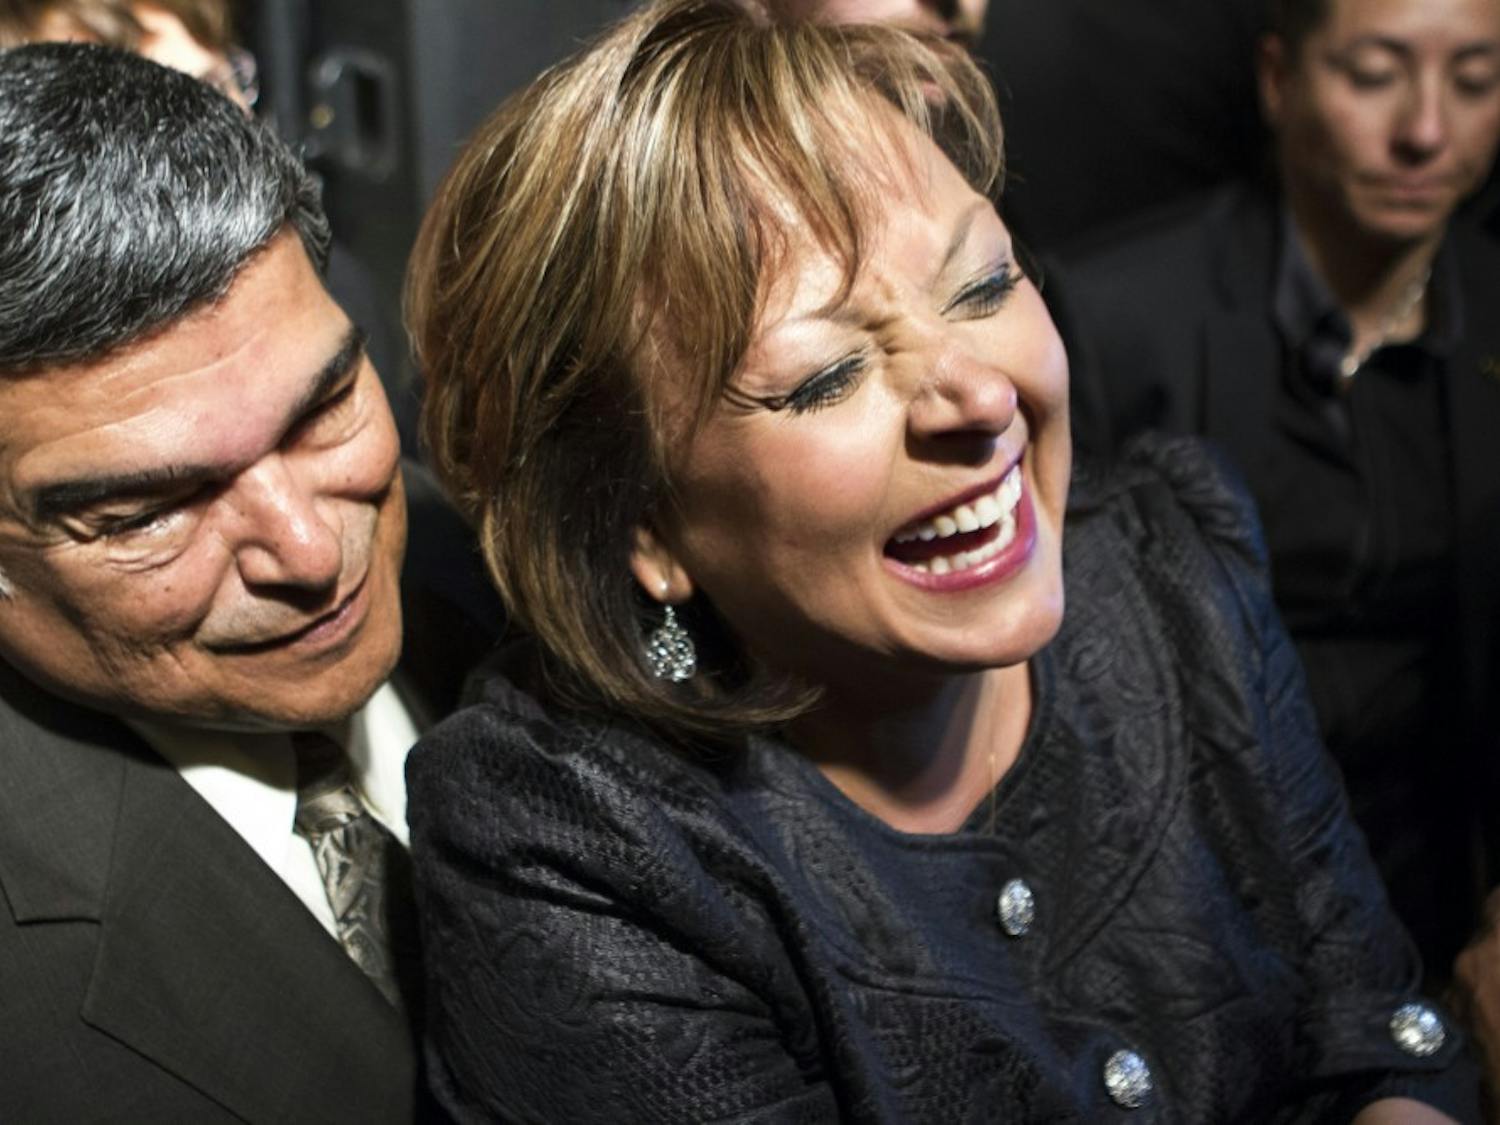 Governor Susana Martinez leaves the stage and celebrates winning her 2014 election Nov. 4, 2014.